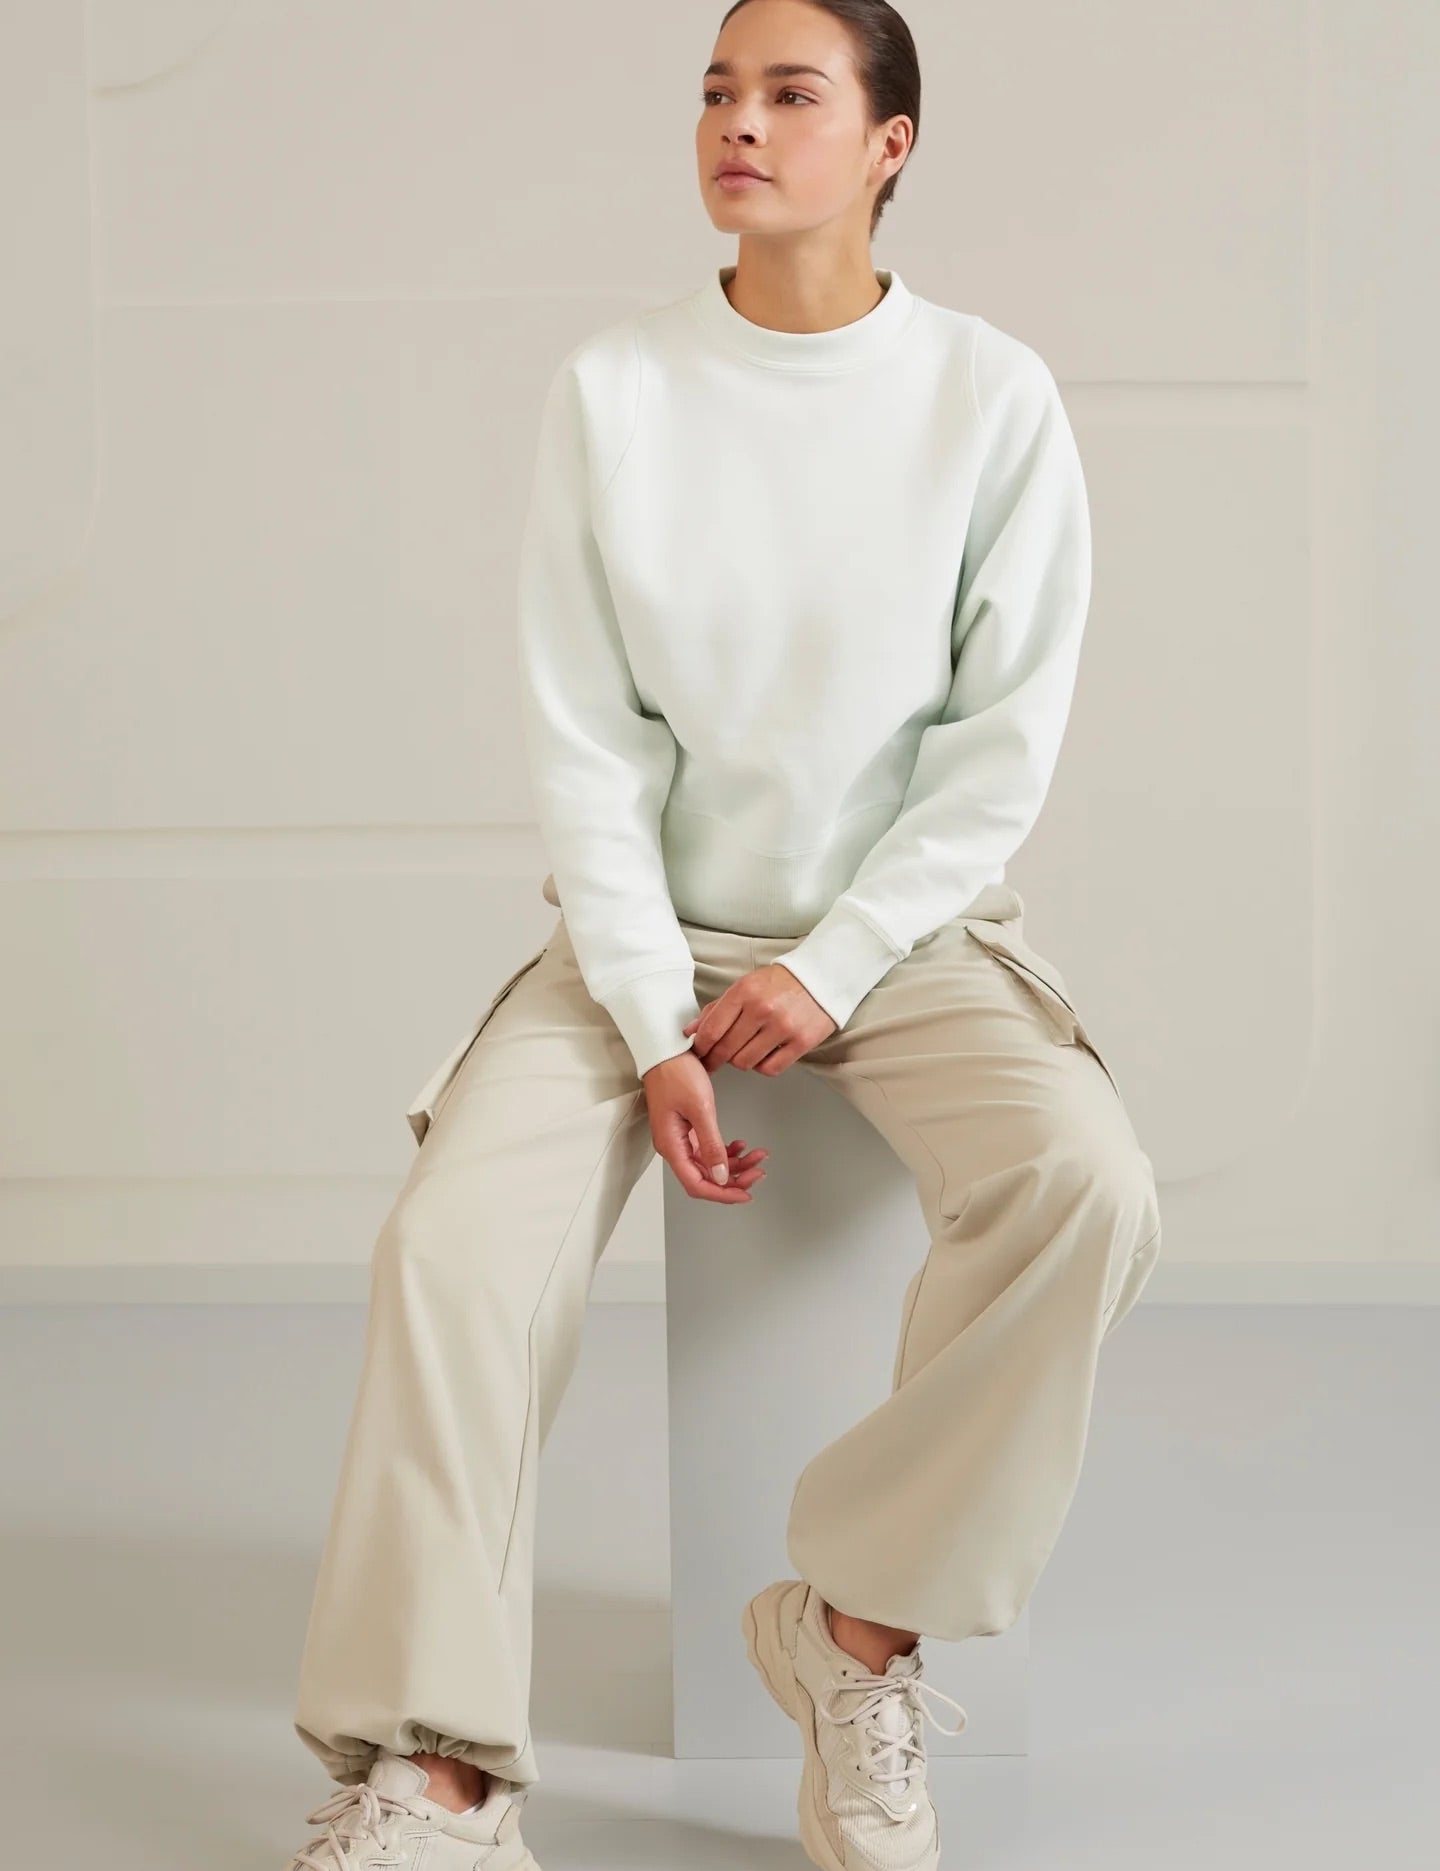 sweatshirt-with-crewneck-long-sleeves-and-dropped-armholes-hint-of-mint-green_2880x_jpg.jpg